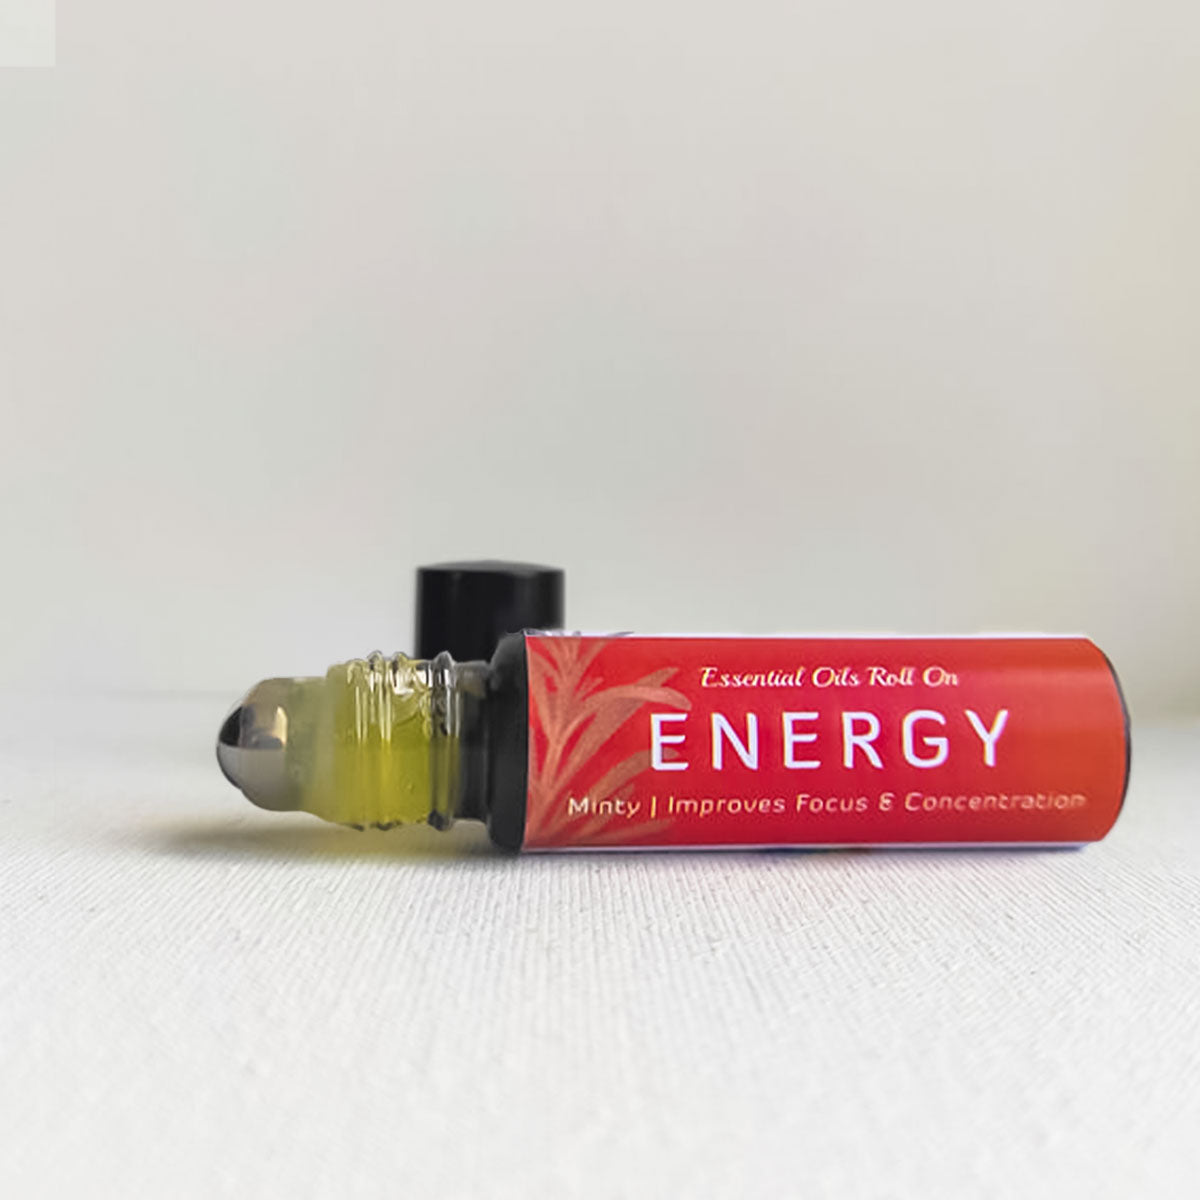 Minty, concentrating essential oil roll on energy